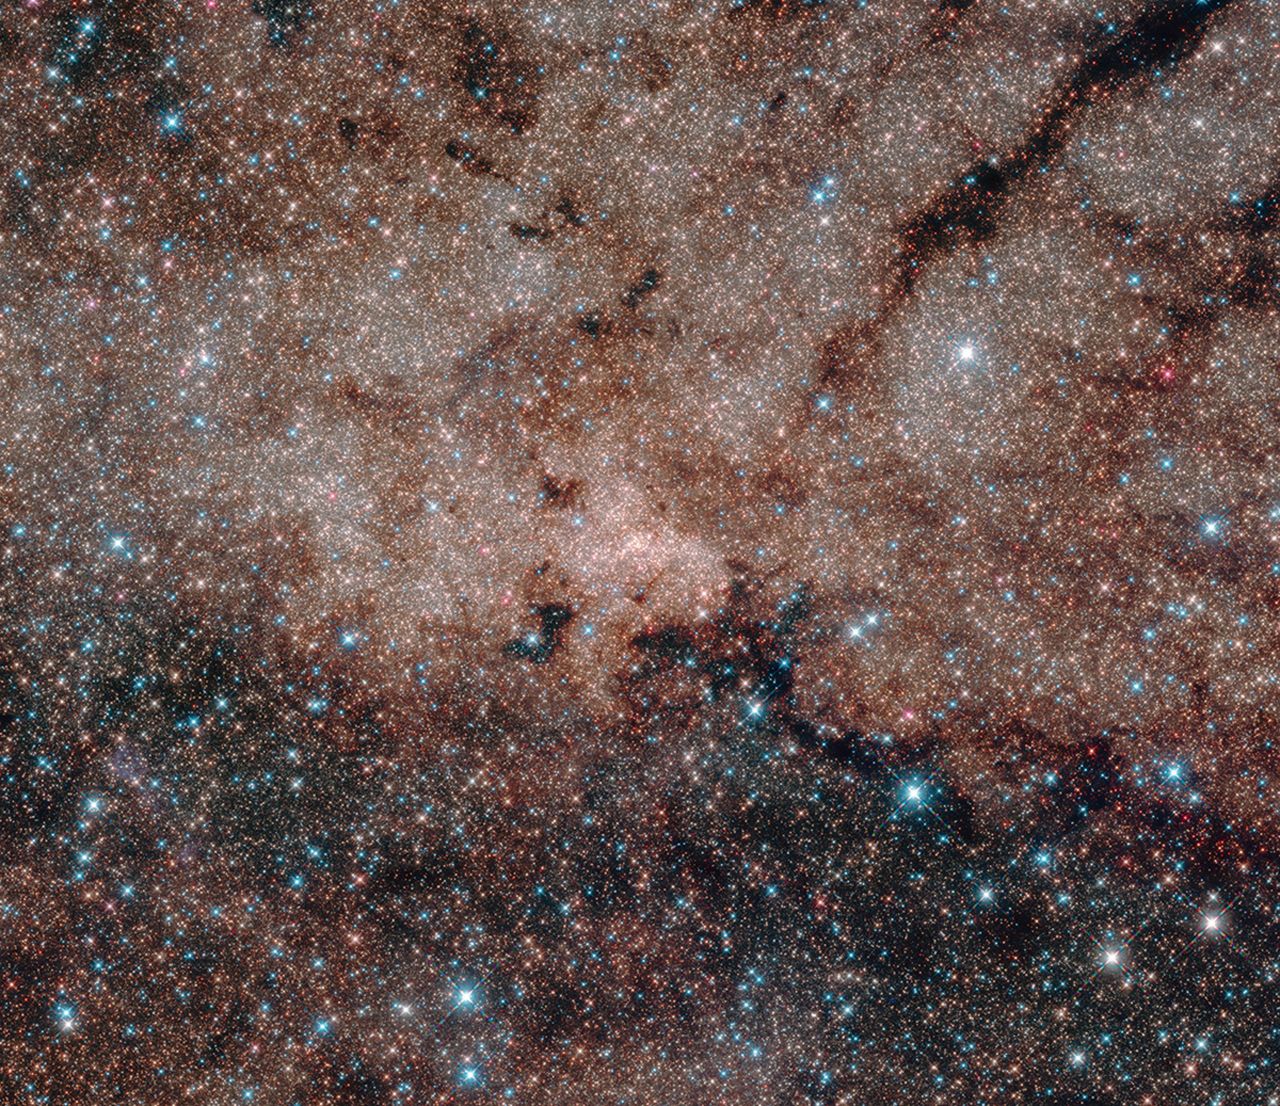 NASA's Hubble Space Telescope, using infrared technology, reveals the <a href="http://www.cnn.com/2016/04/01/us/milky-way-hubble-feat/index.html">density of stars in the Milky Way.</a> According to NASA, the photo -- stitched together from nine images -- contains more than a half-million stars. The star cluster is the densest in the galaxy. 